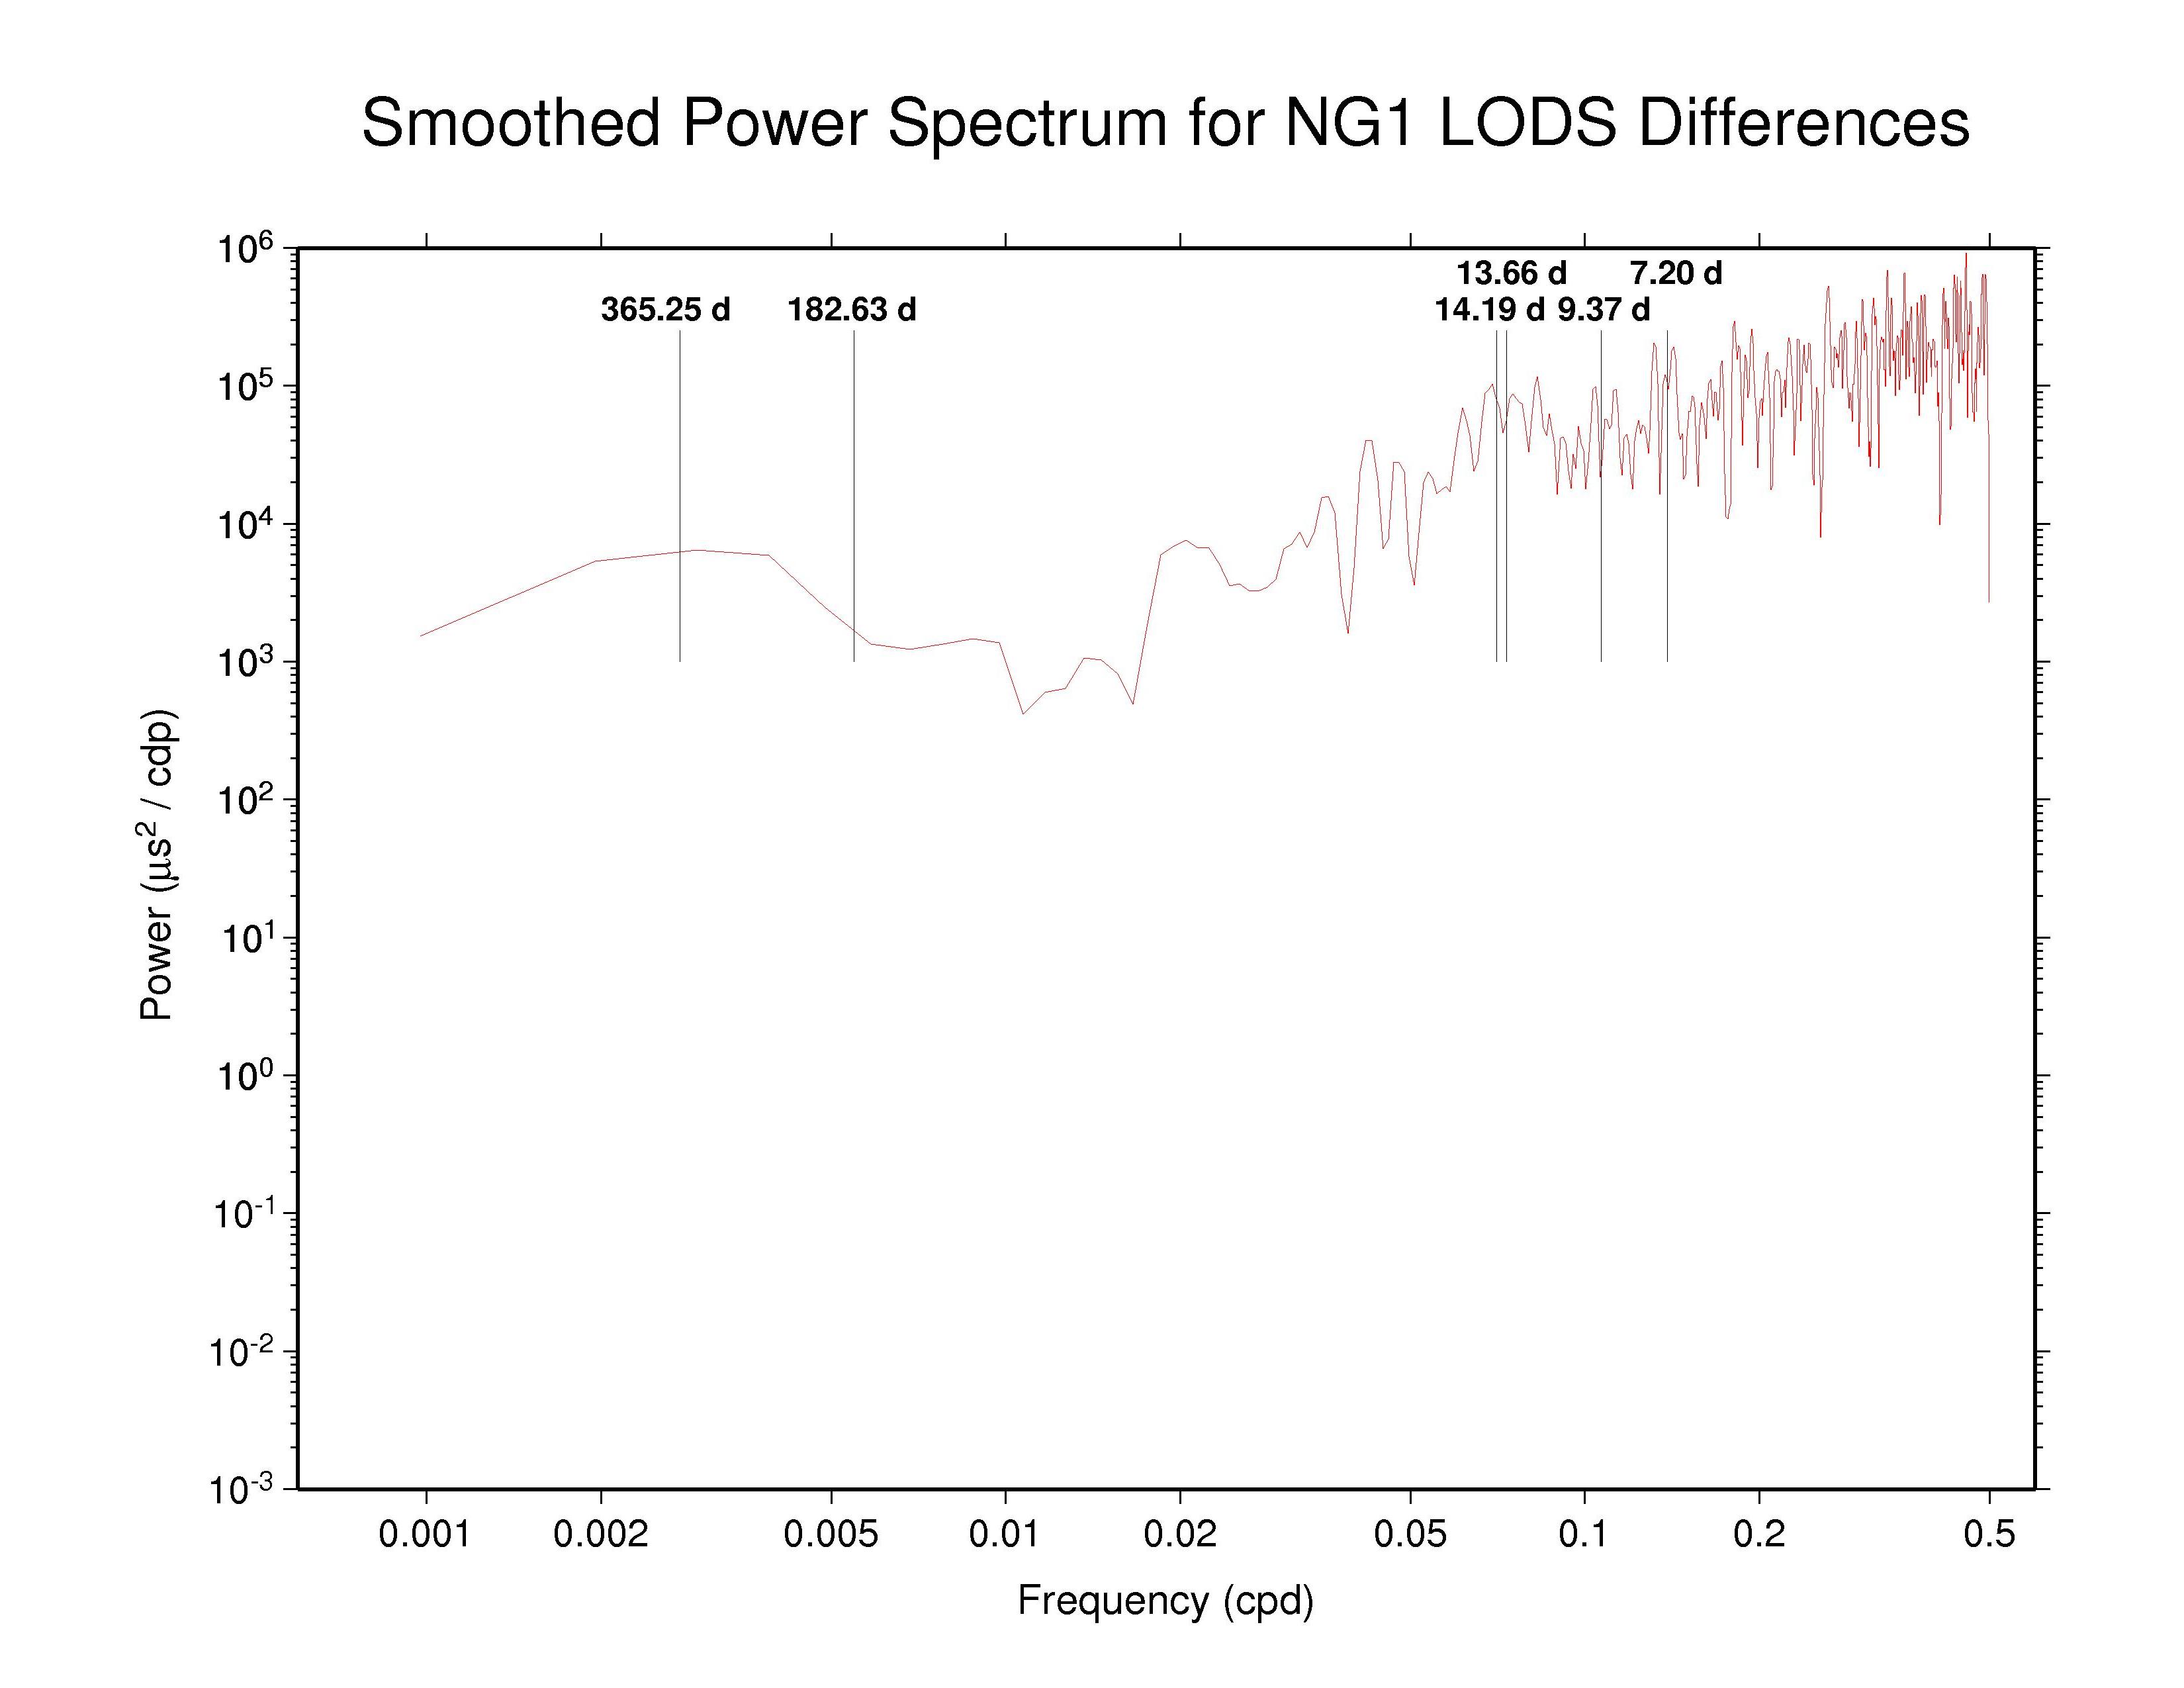 NGS LOD discontinuities